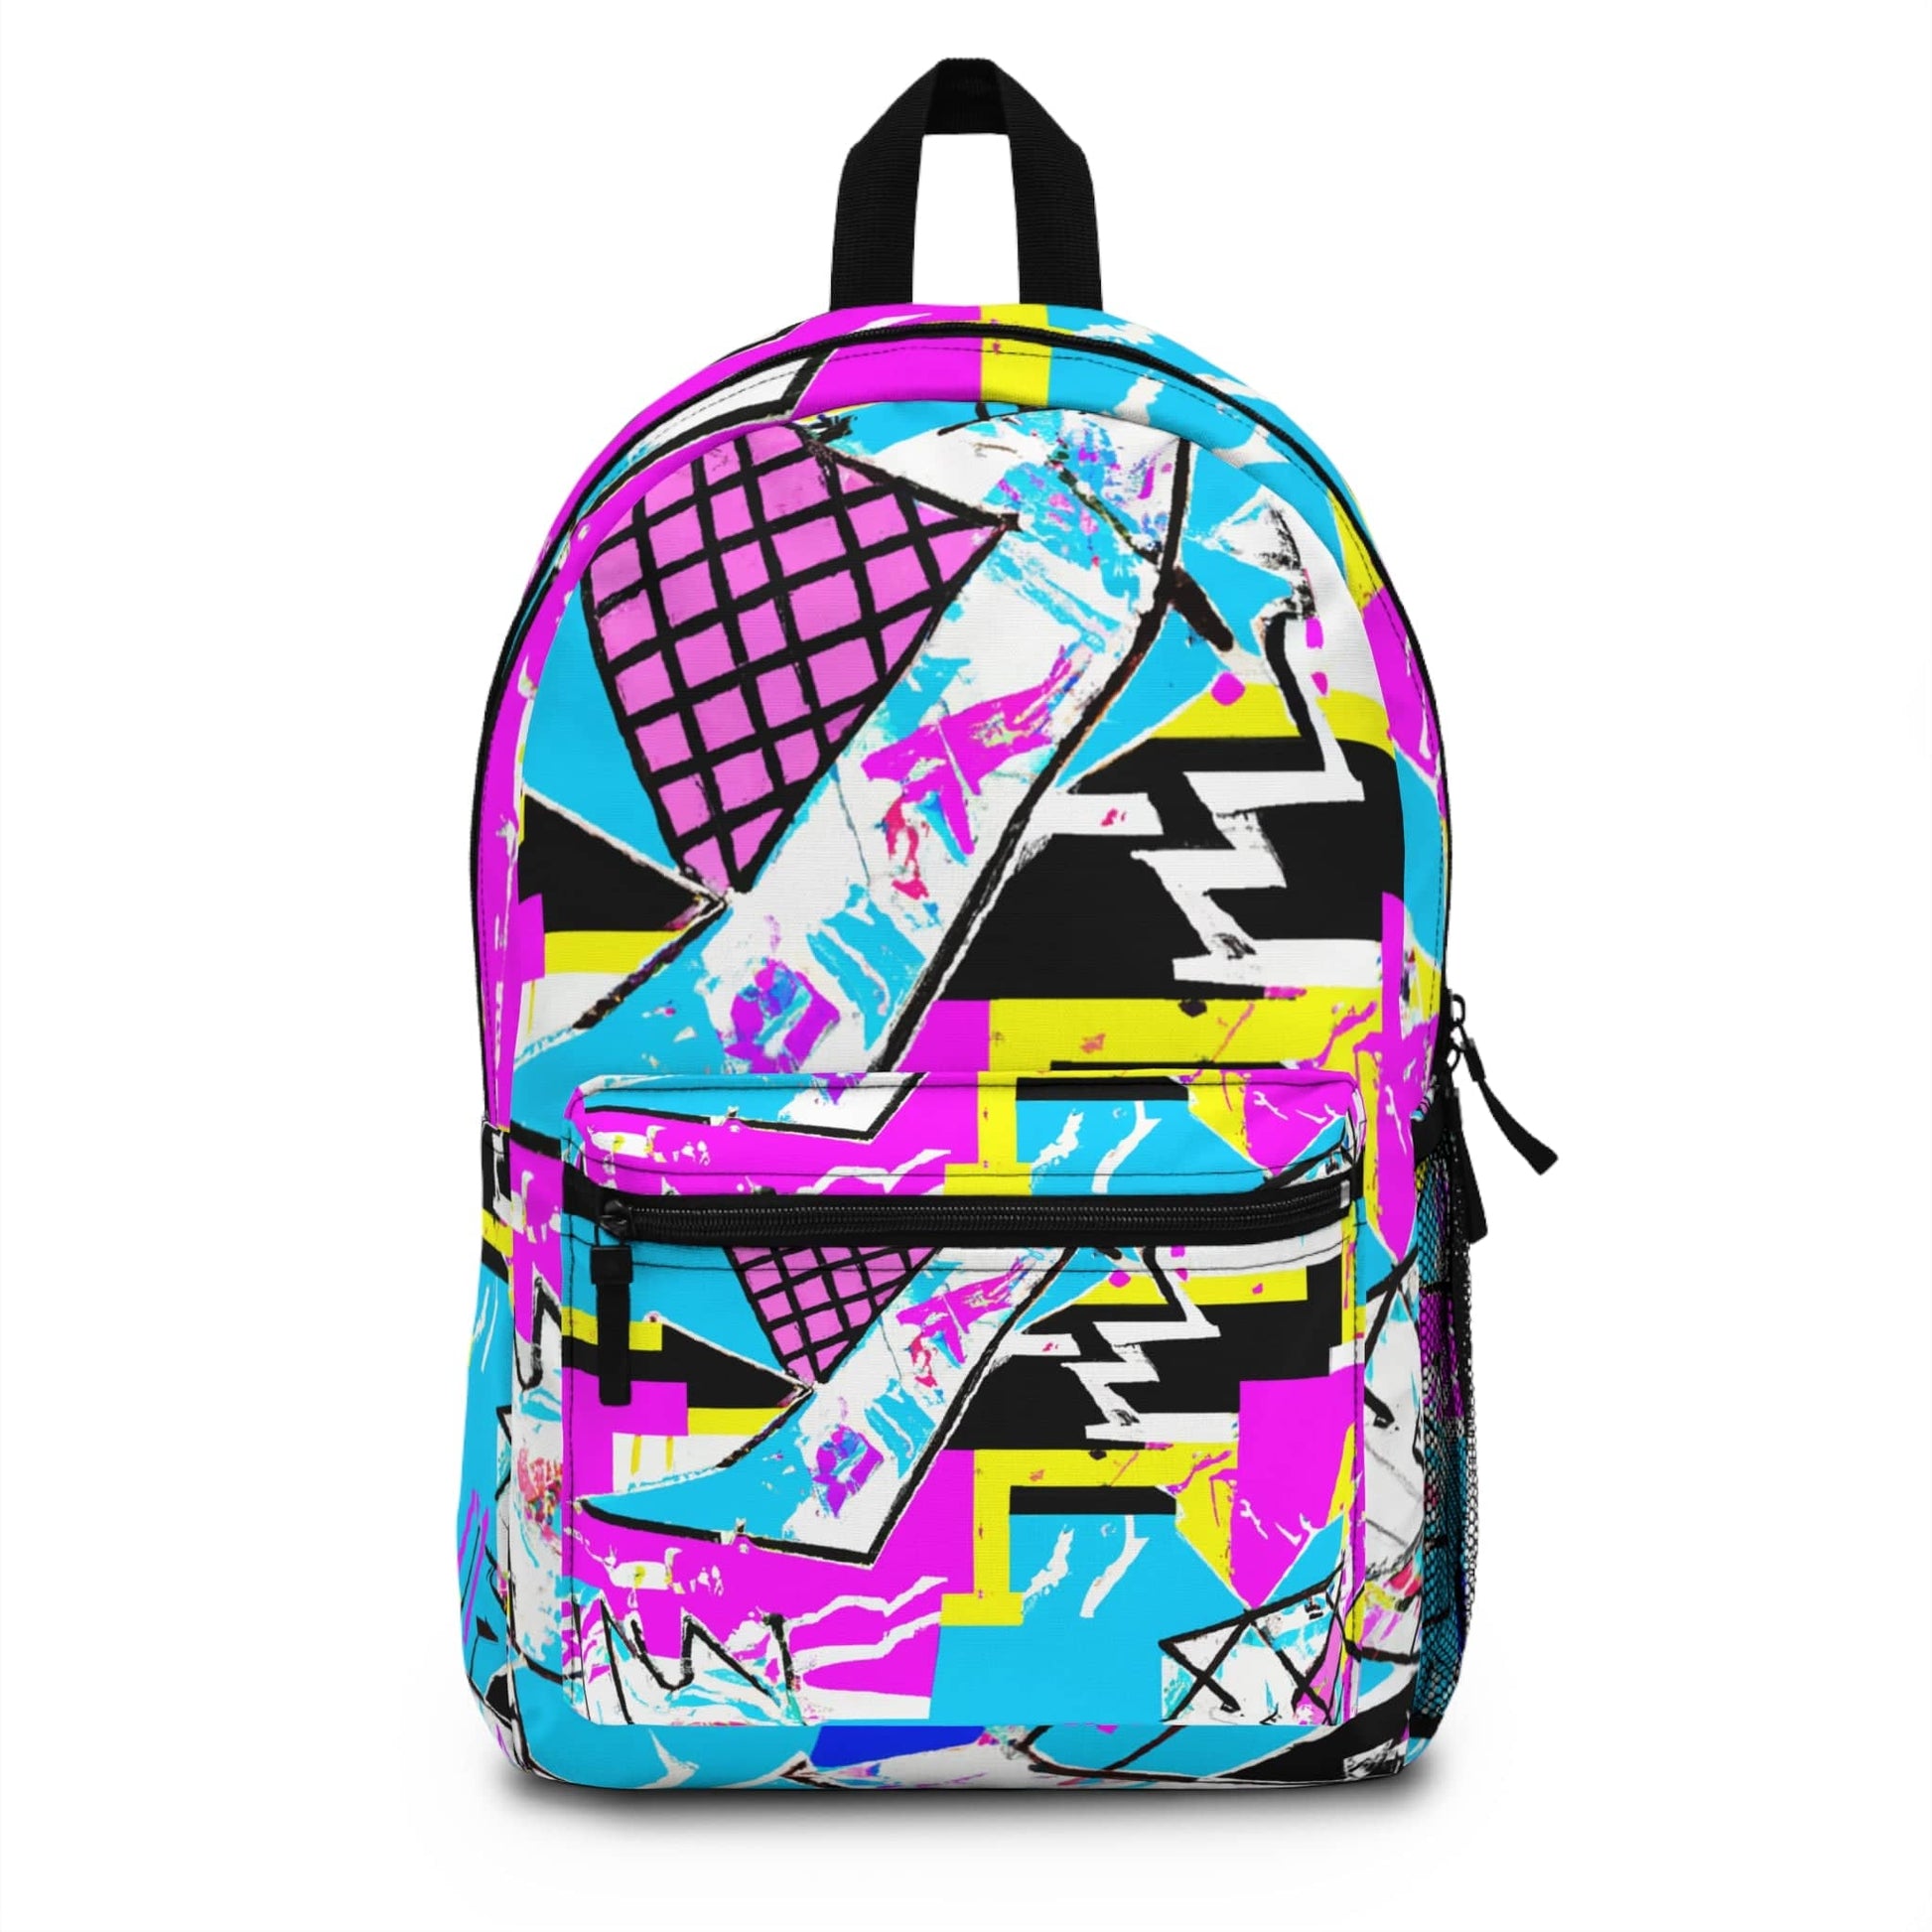 GraffitiScribe: The Edgy Canvas Graffiti Bookbag for School, Travel, Urban Art Lovers, and Trendsetters Bags Bigger Than Life   